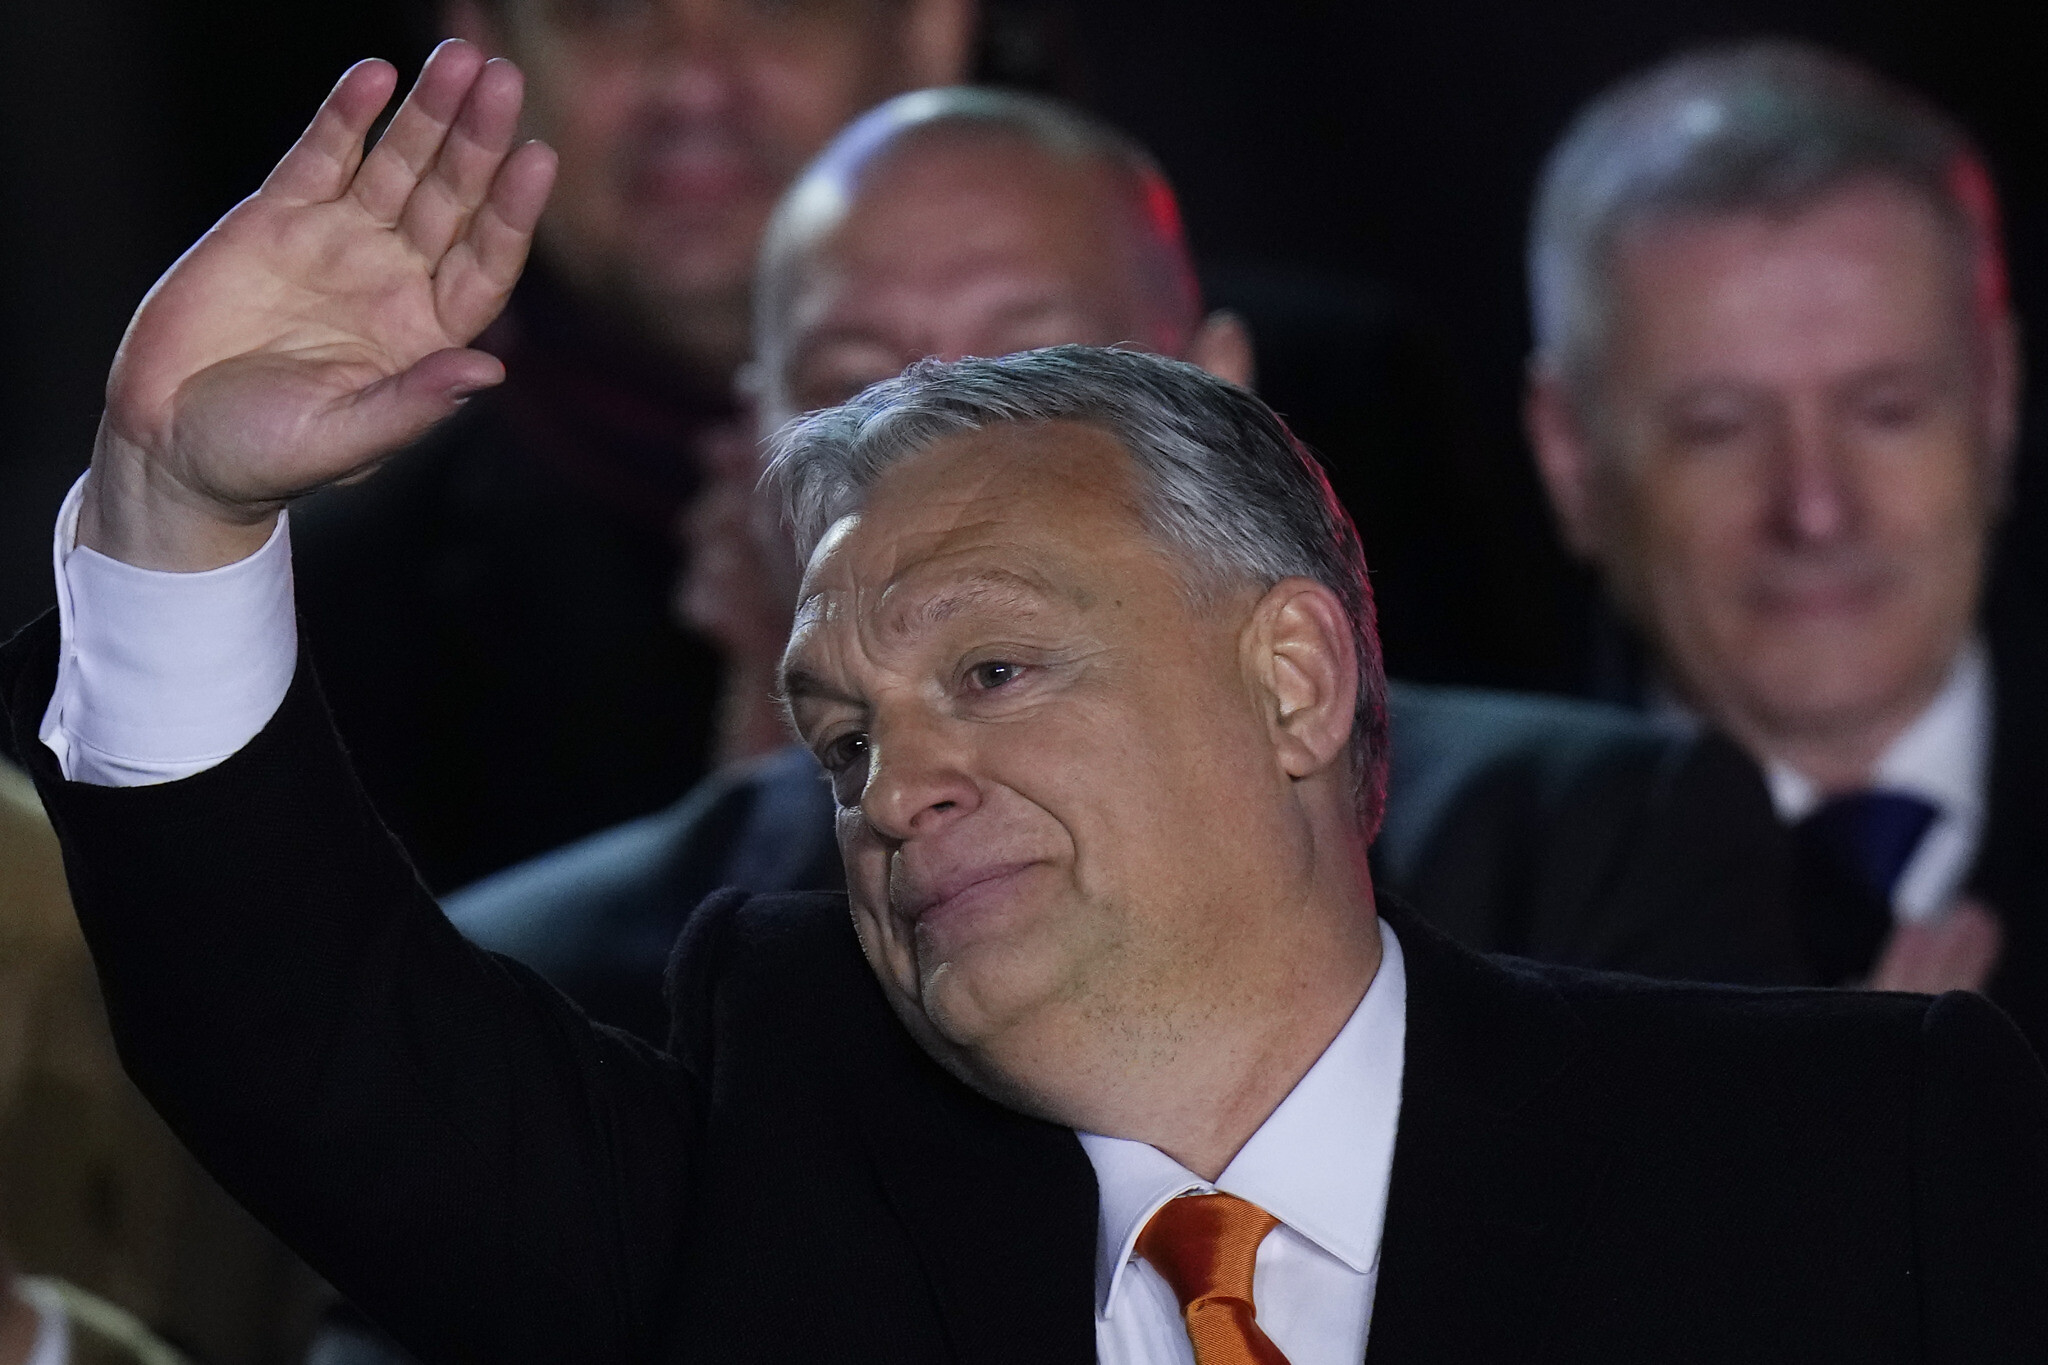 Orban claims 'huge victory' for his right-wing party in Hungary elections | The Times of Israel